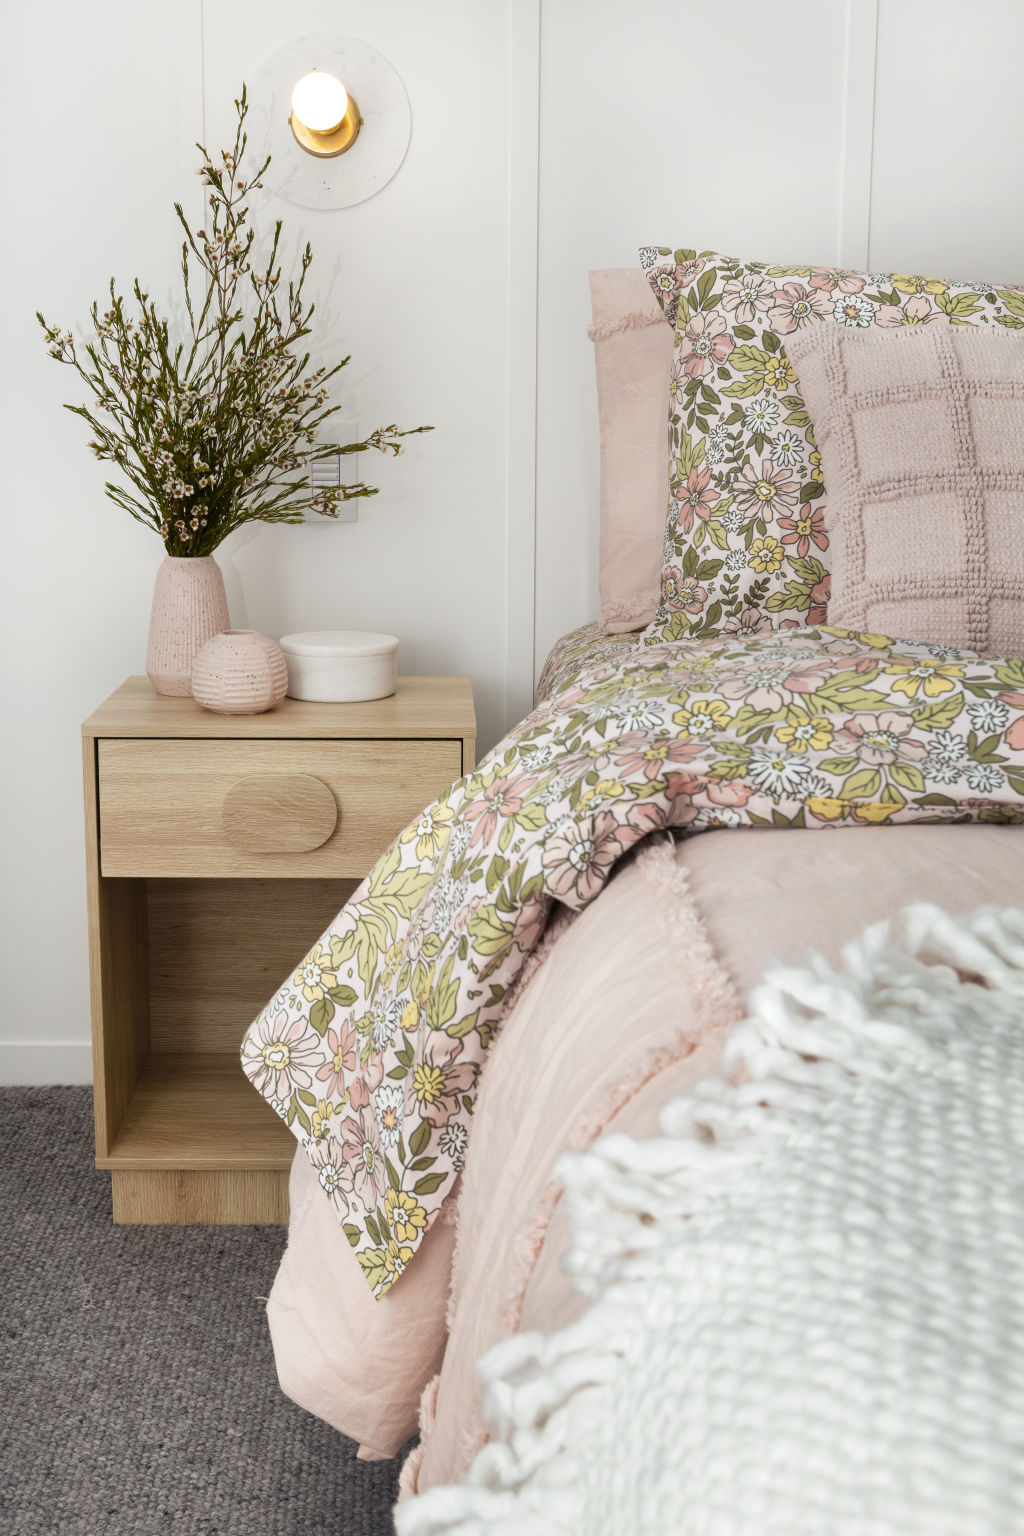 The new mix of palettes from Kmart include calming and soft pastels. Photo: Supplied